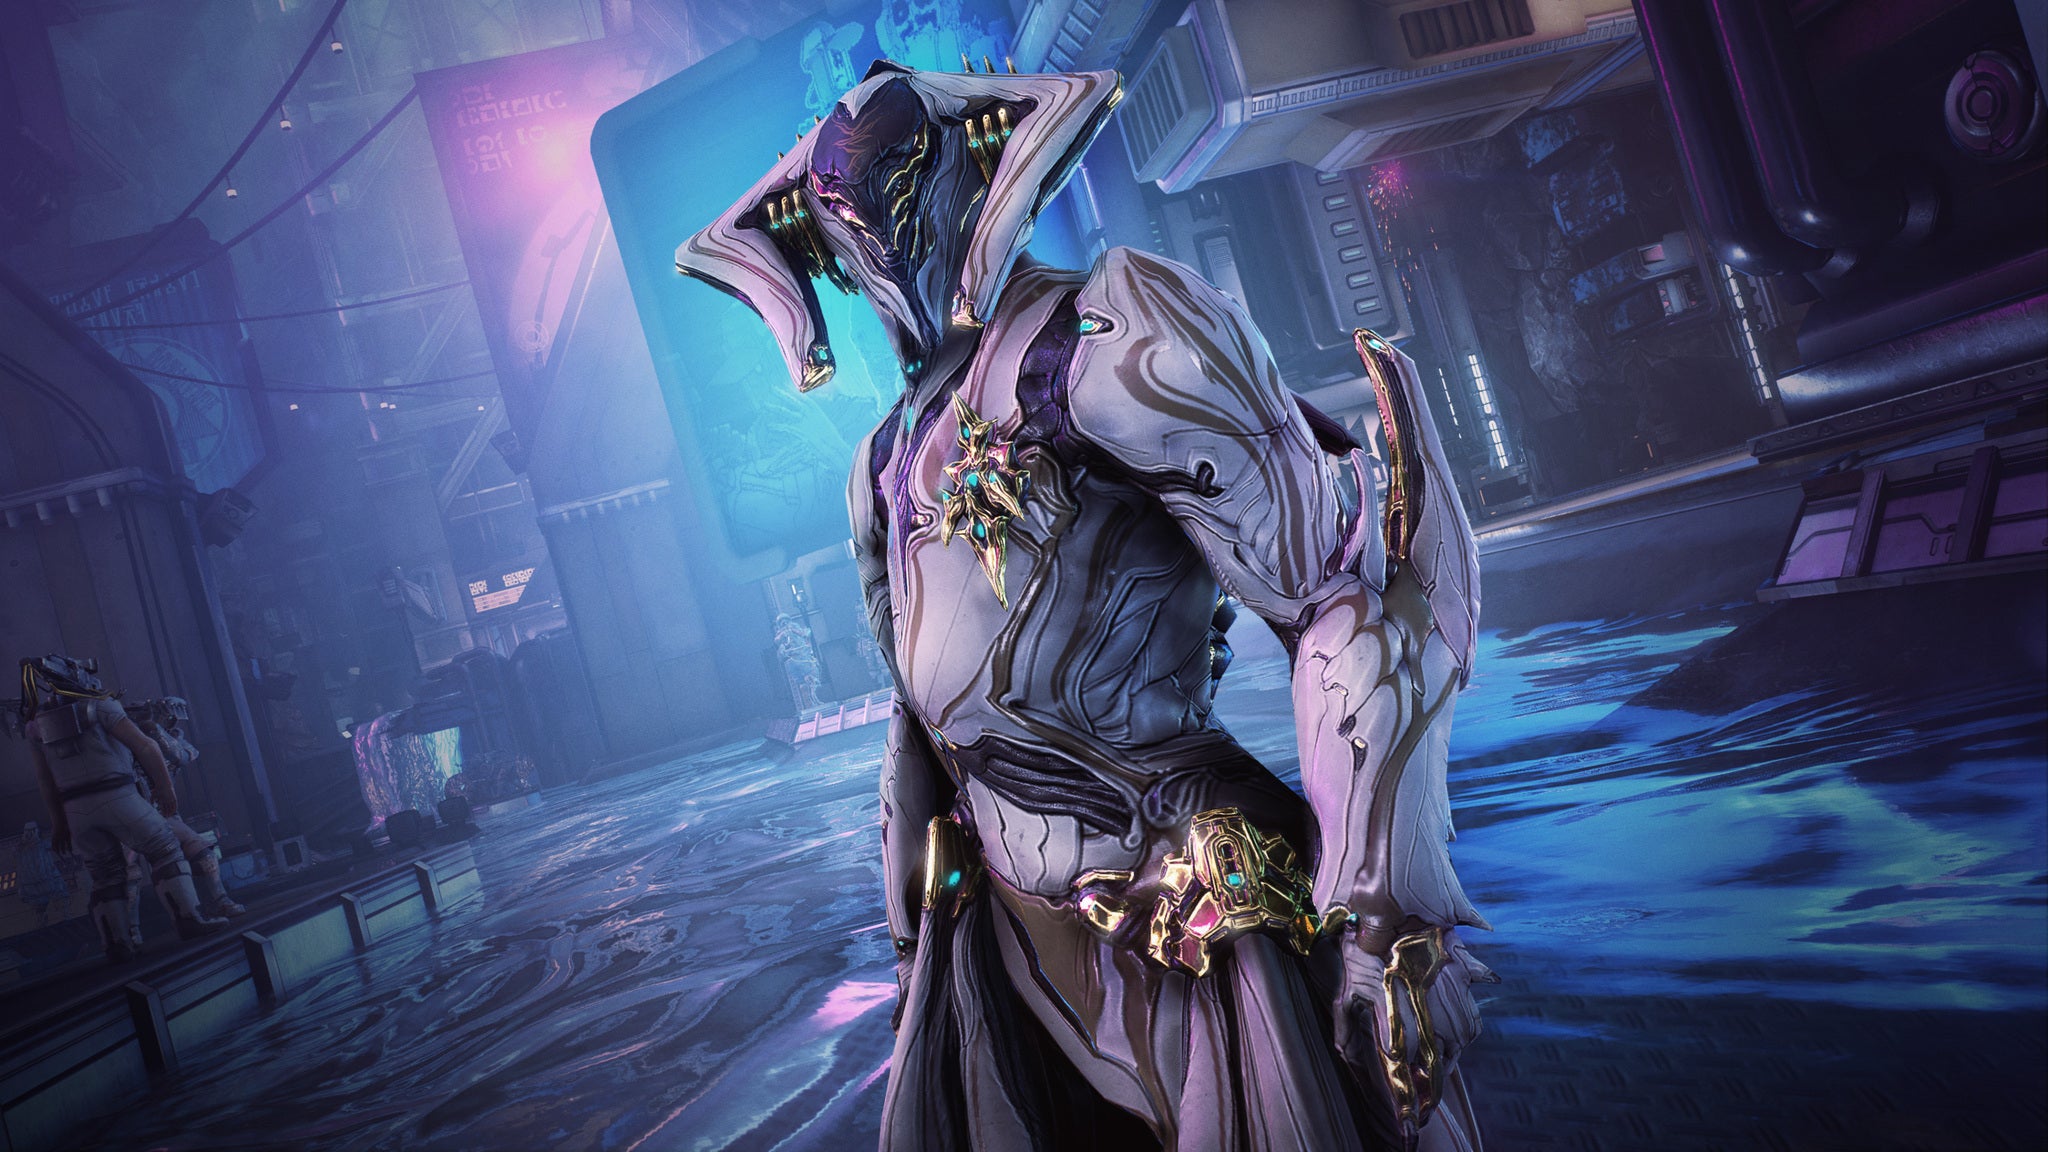 Image for TennoCon 2021 will feature an 'interactive preview' of the next Warframe expansion